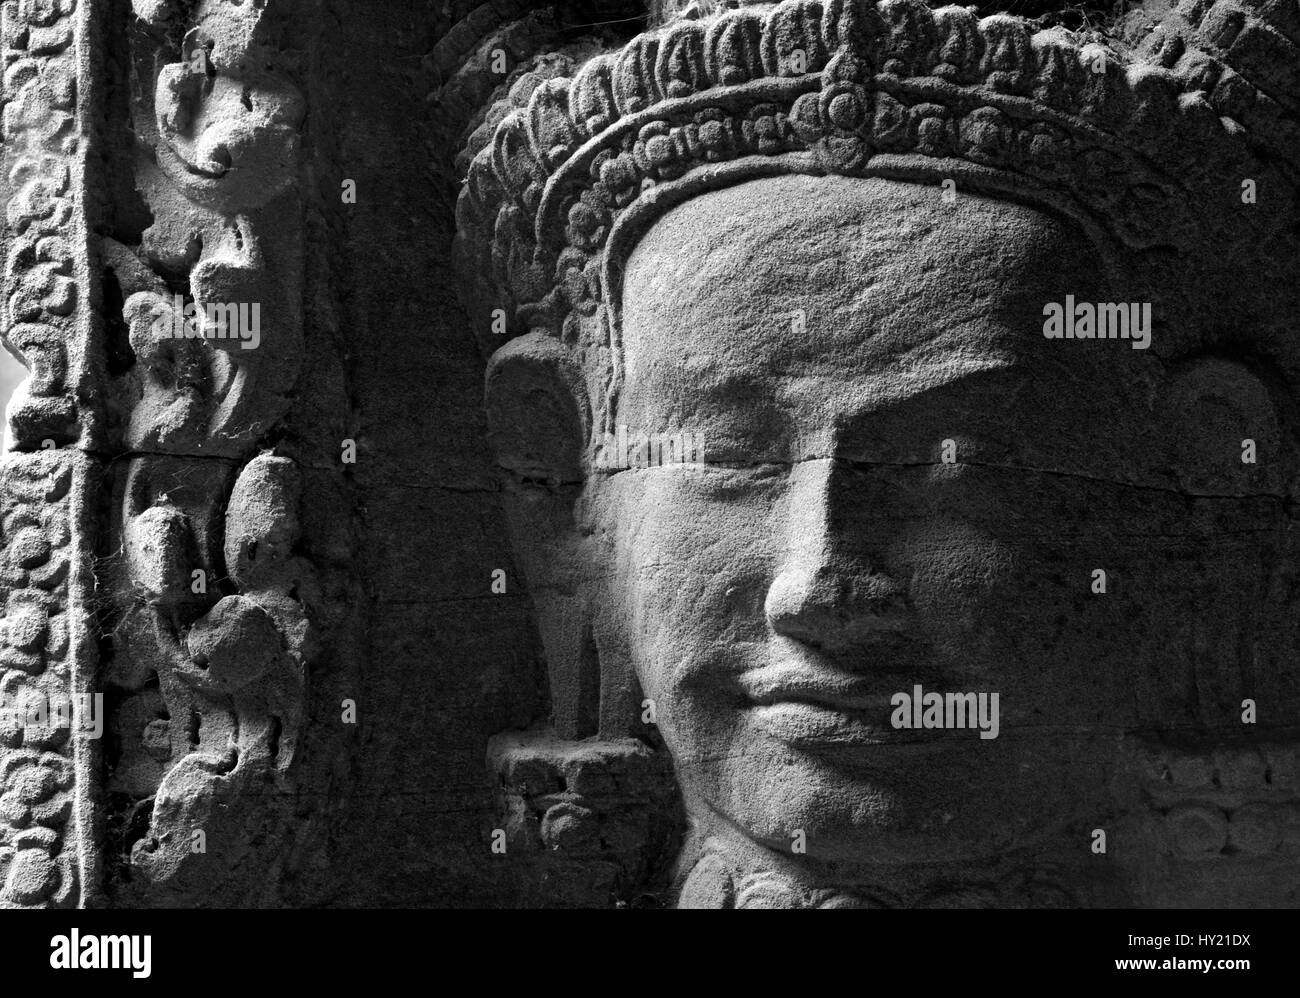 This stock photo shows a close up of a stone carving of a face at the famous Angkor Wat Temple near Siam Reap in Cambodia. The image shows the typical Stock Photo